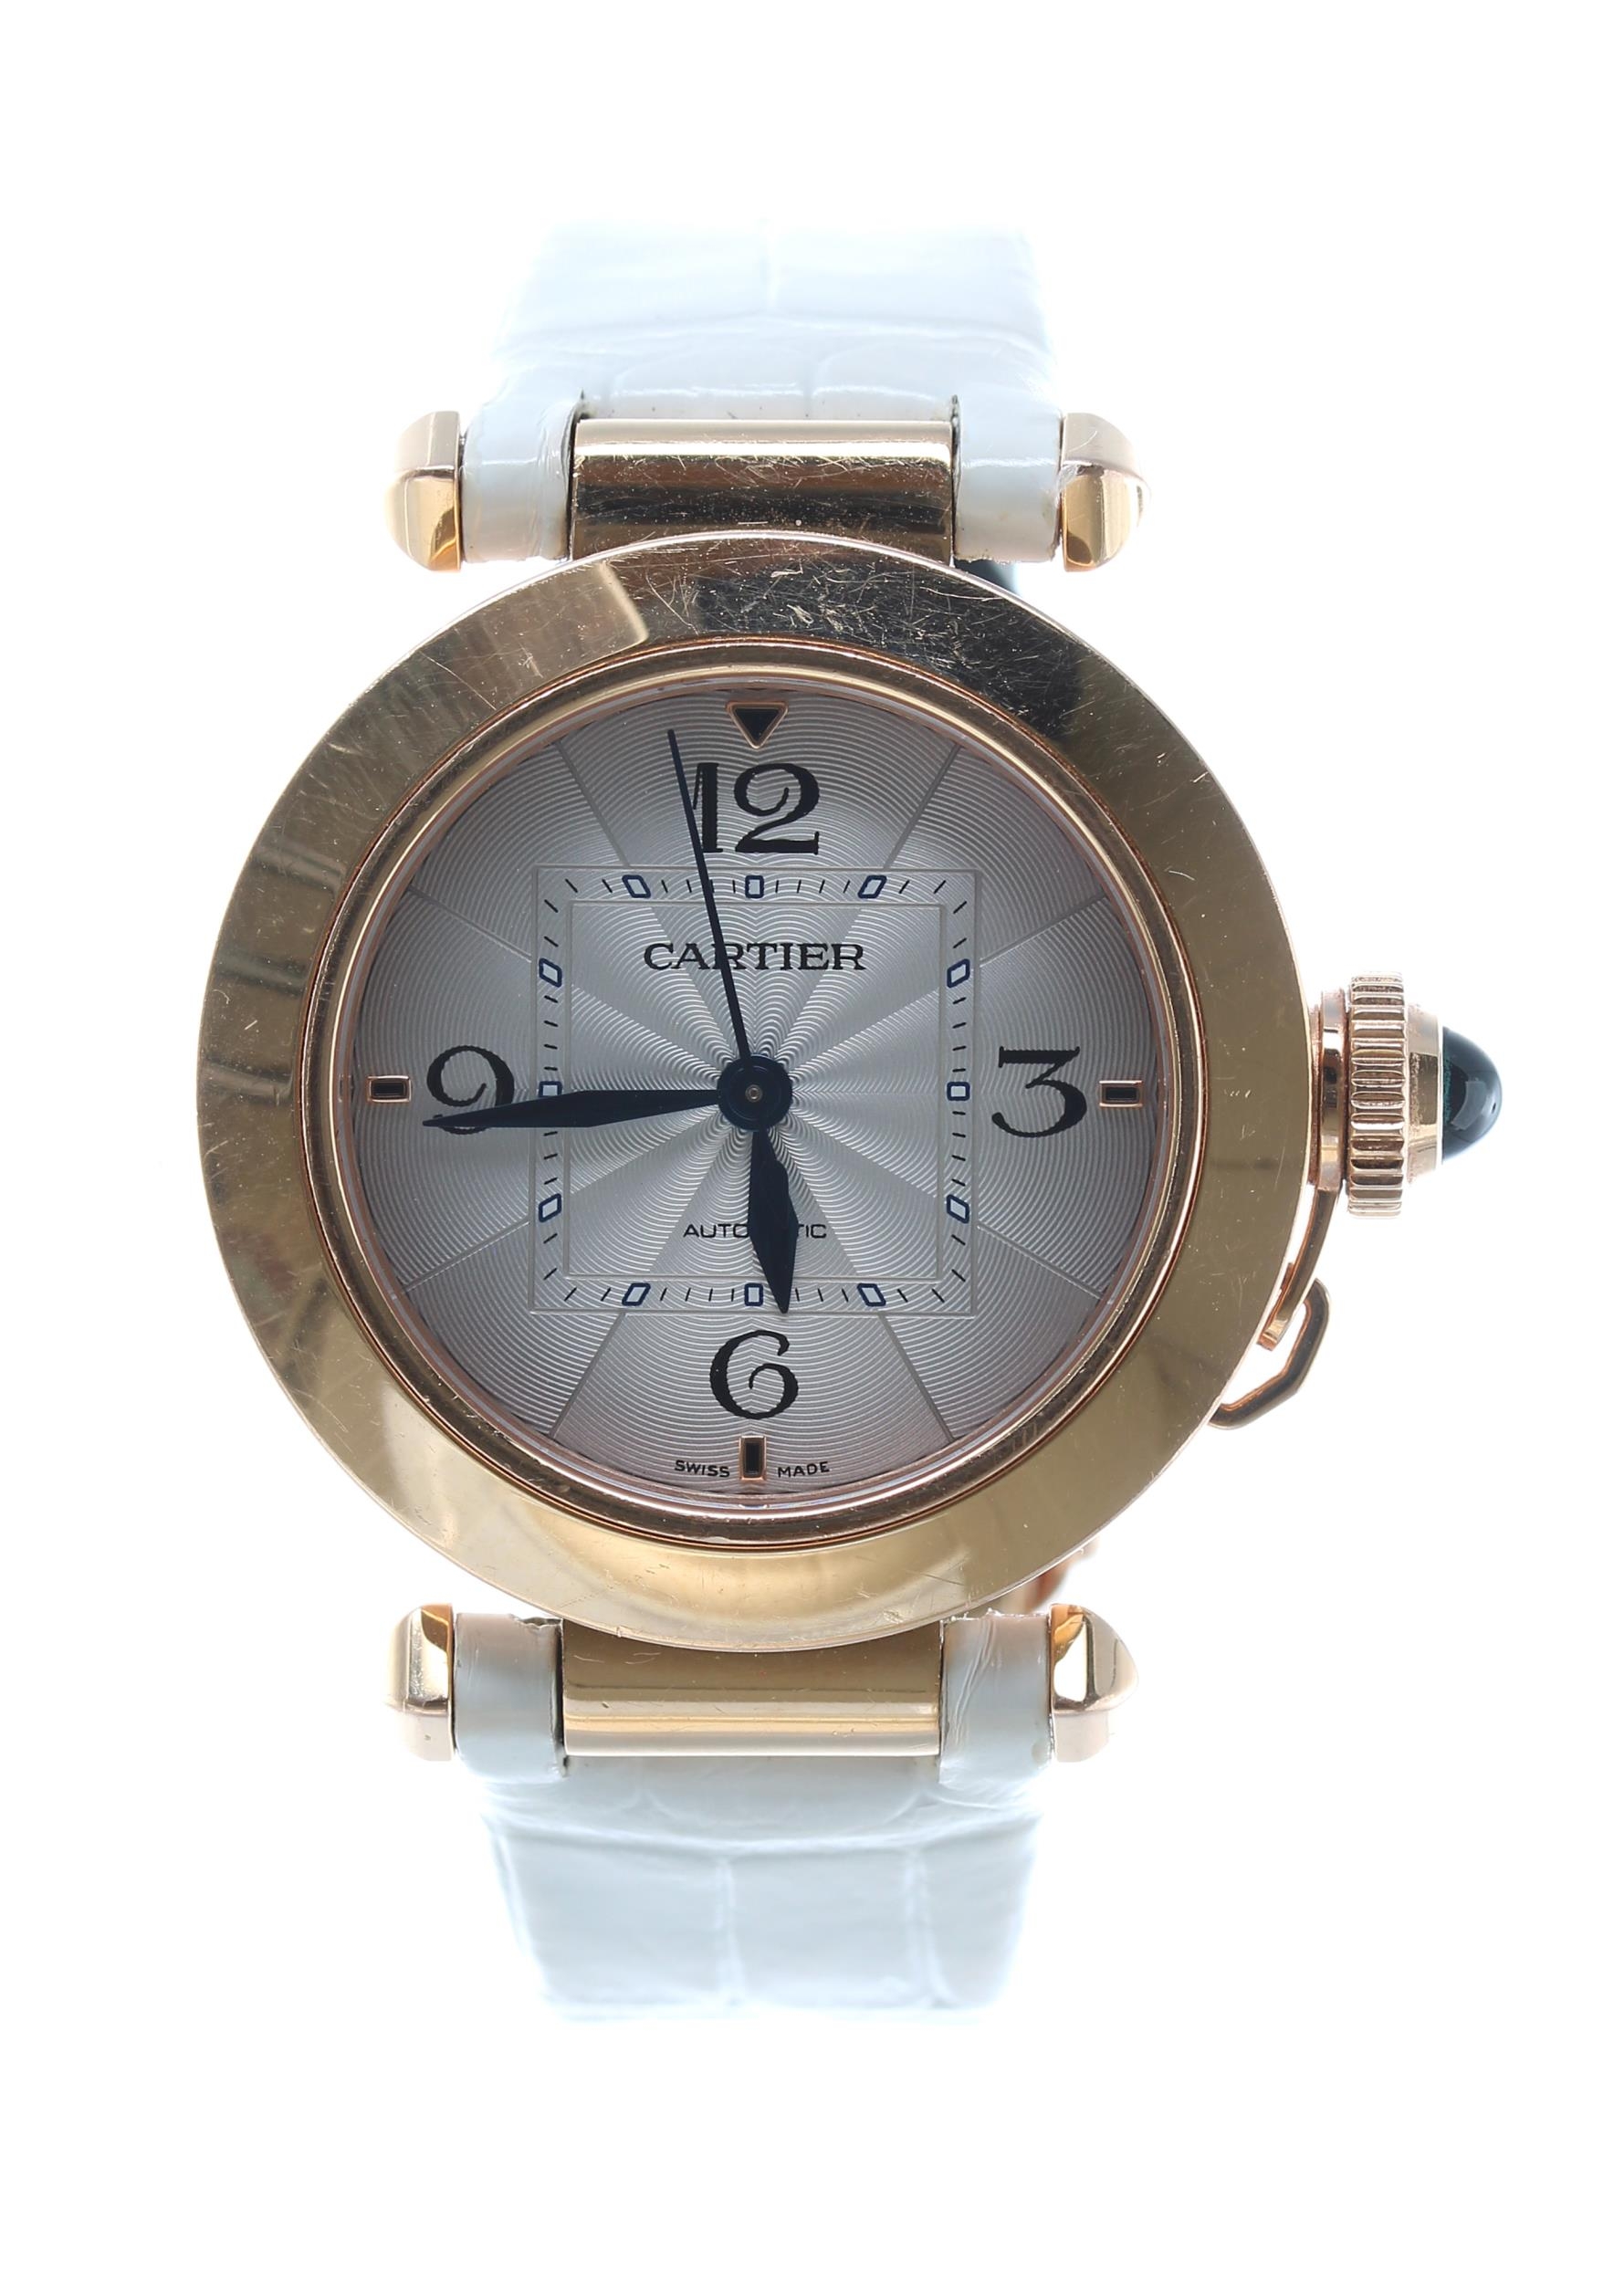 Cartier Pasha 18ct rose gold automatic wristwatch, reference no. 4326, serial no. 22385xxx, silvered